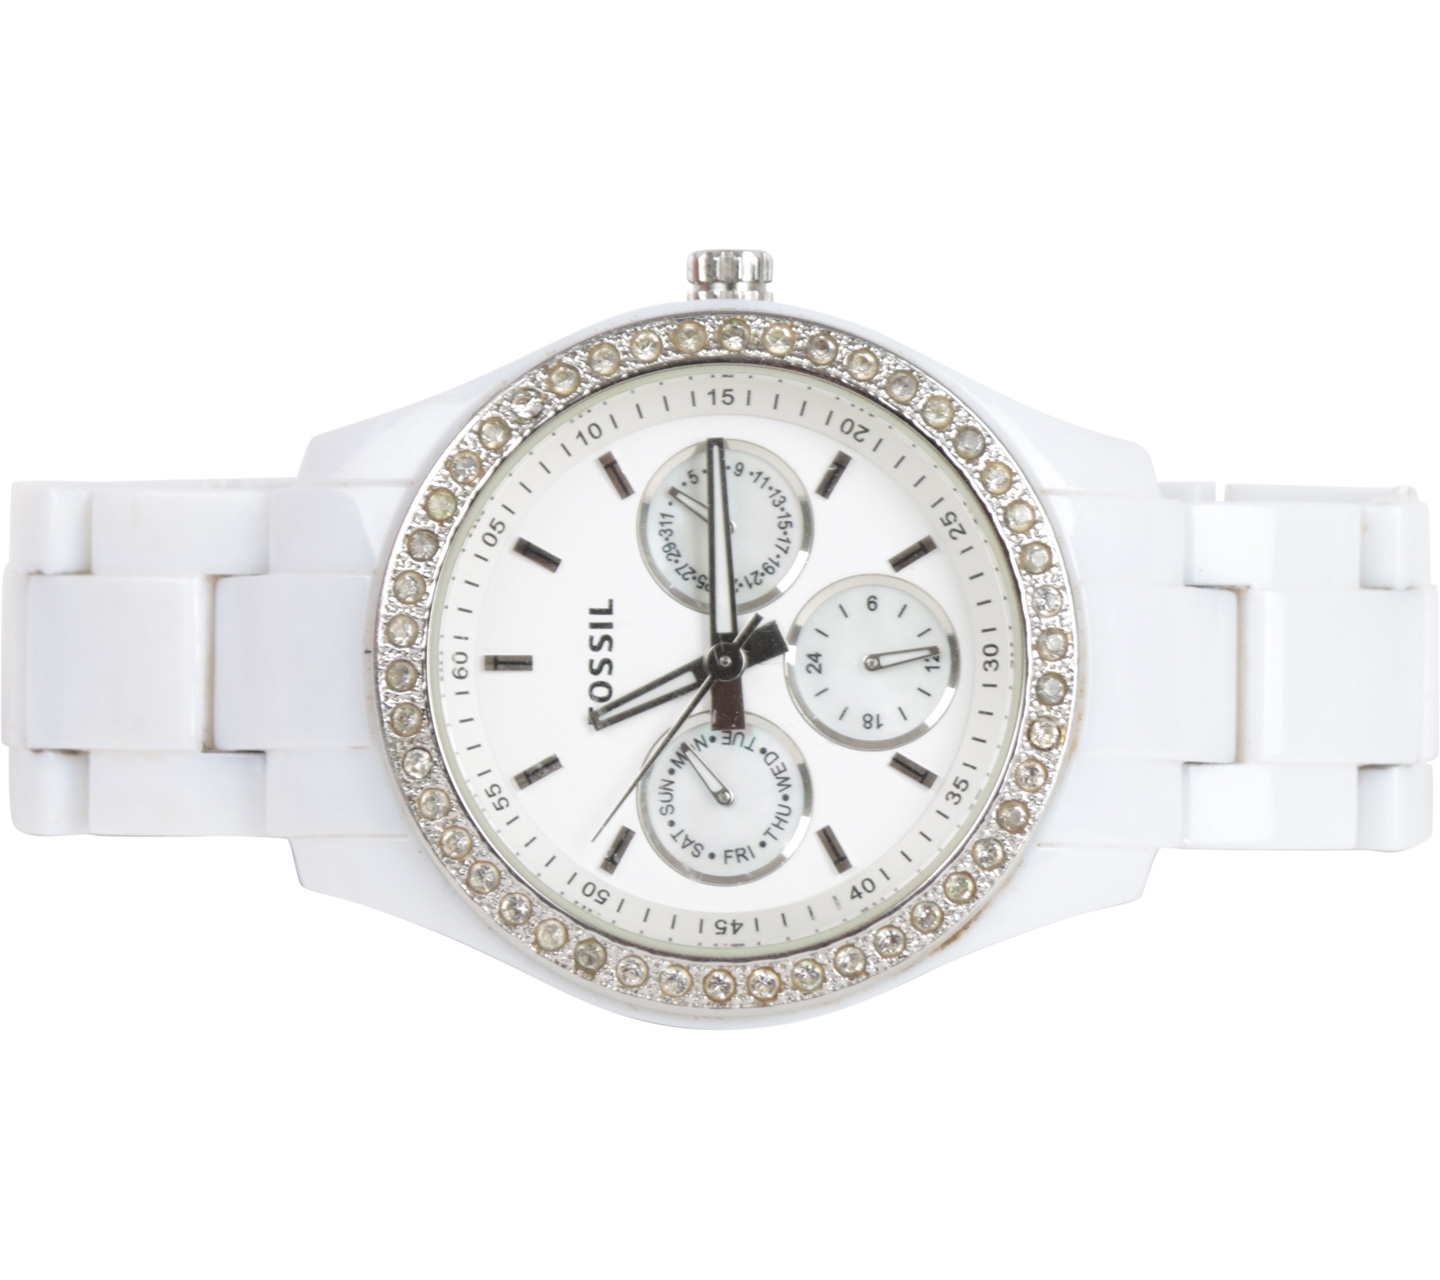 Fossil White Watch